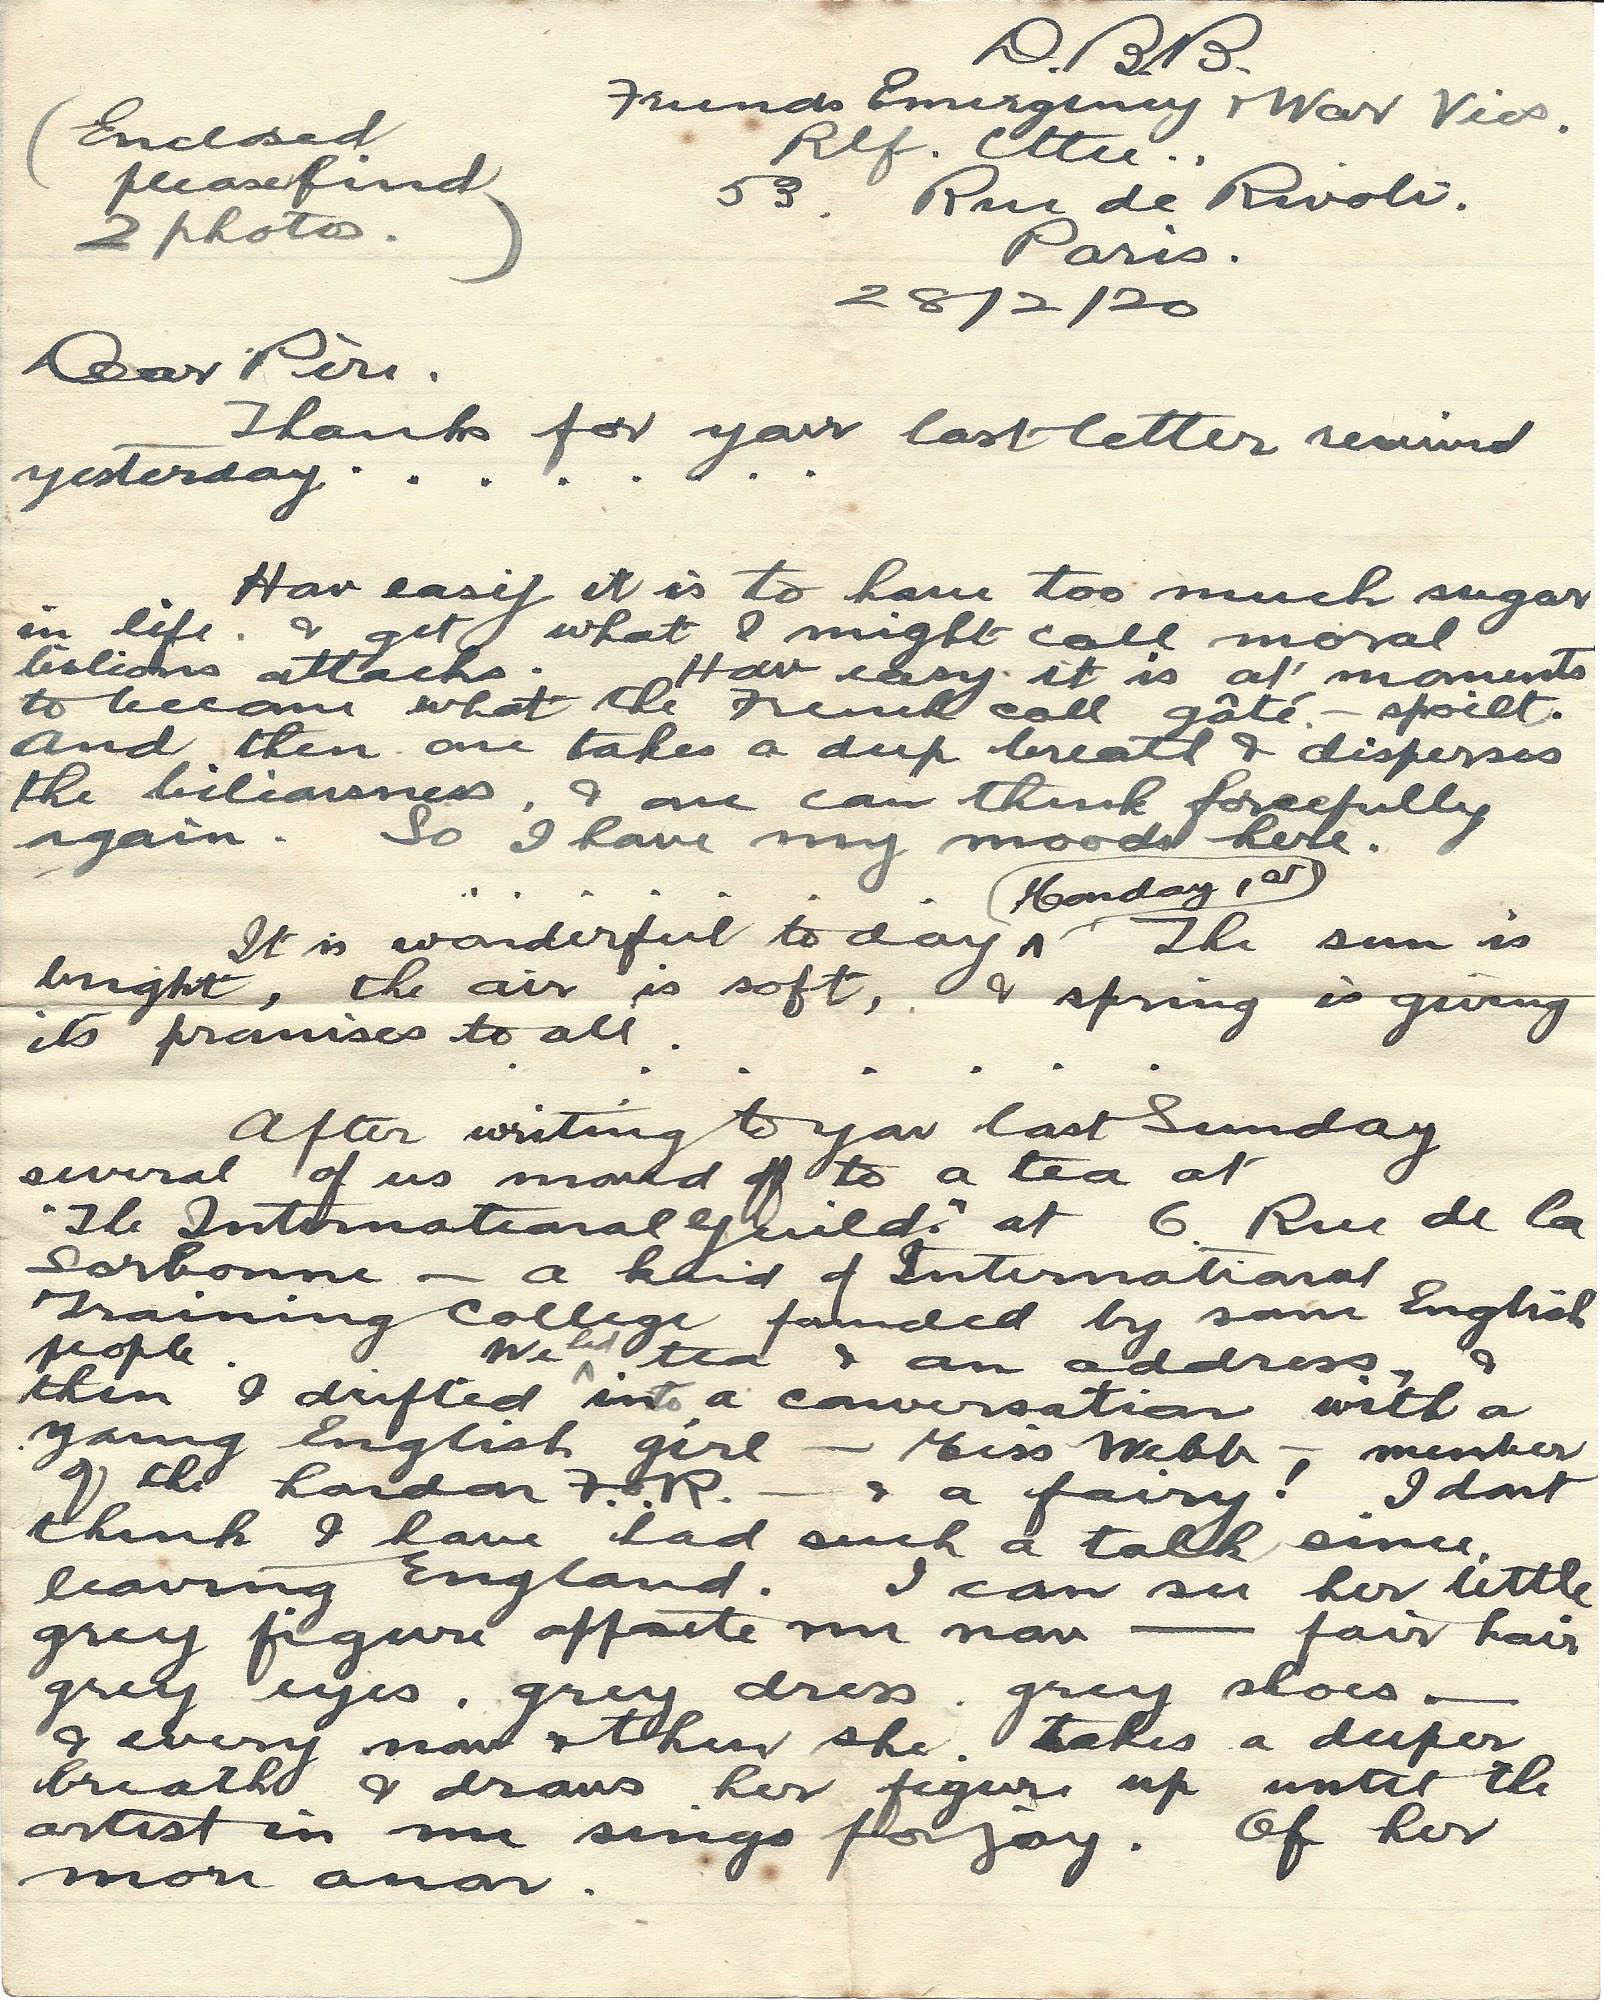 1920-02-28 p1 Donald Bearman letter to his father